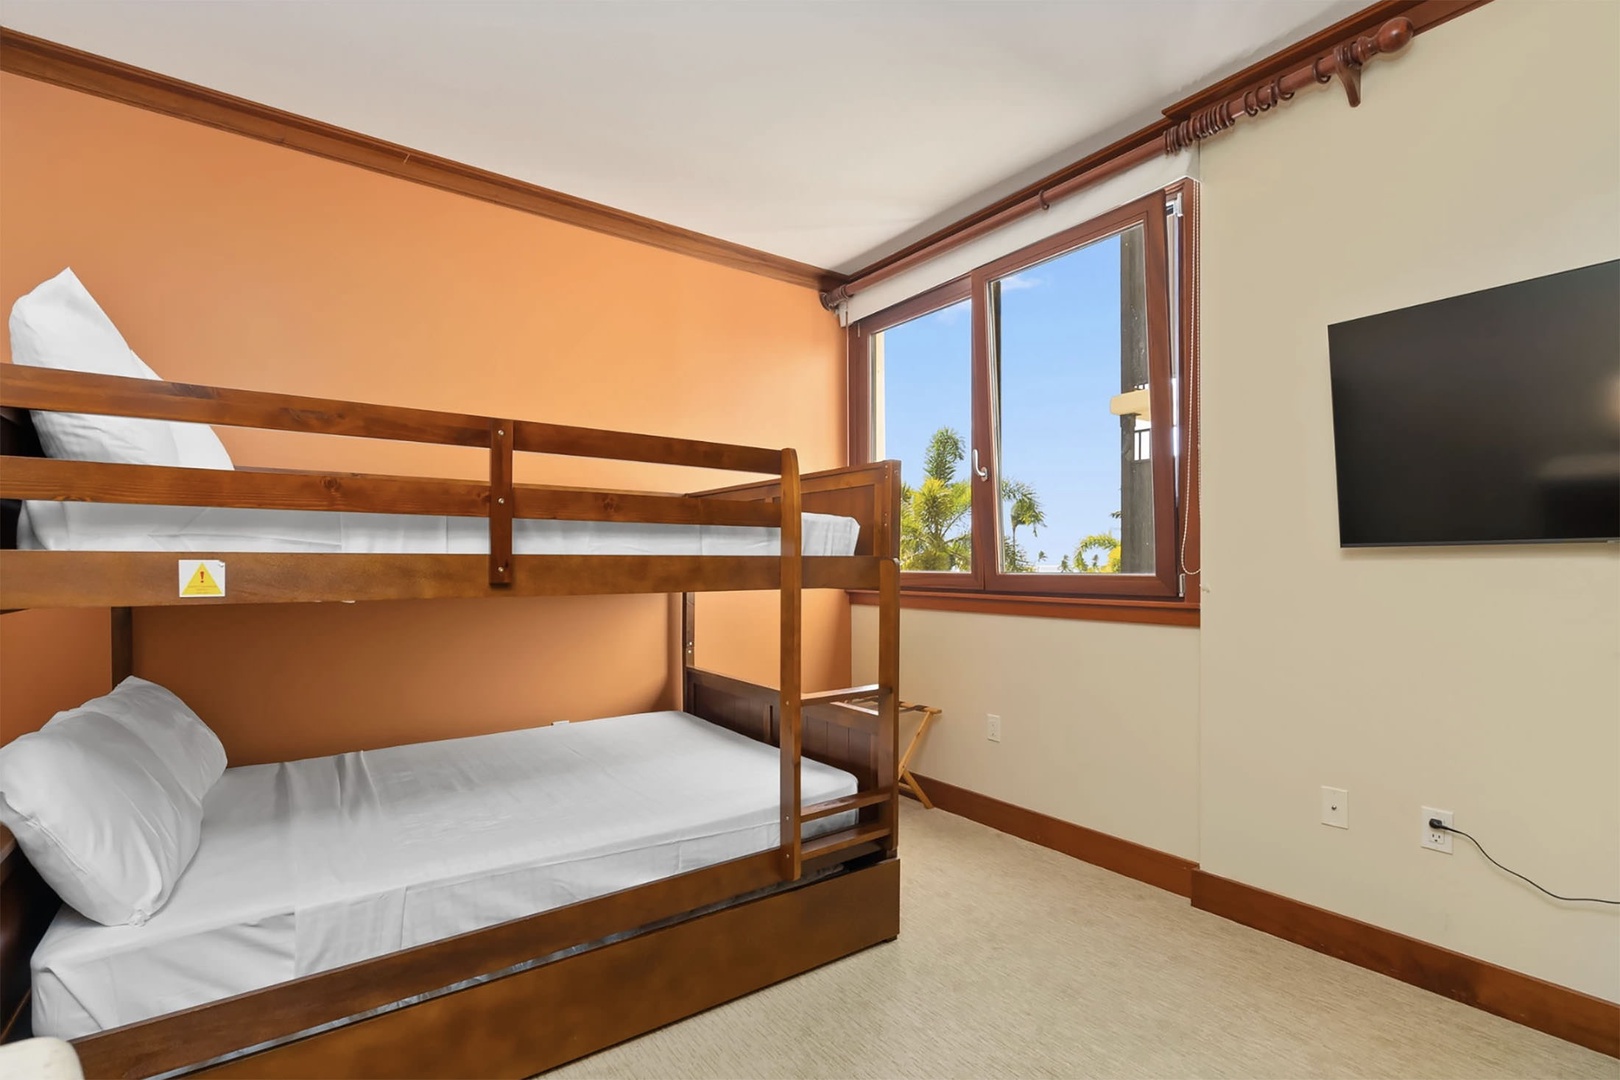 Bedroom 3 features a bunk bed